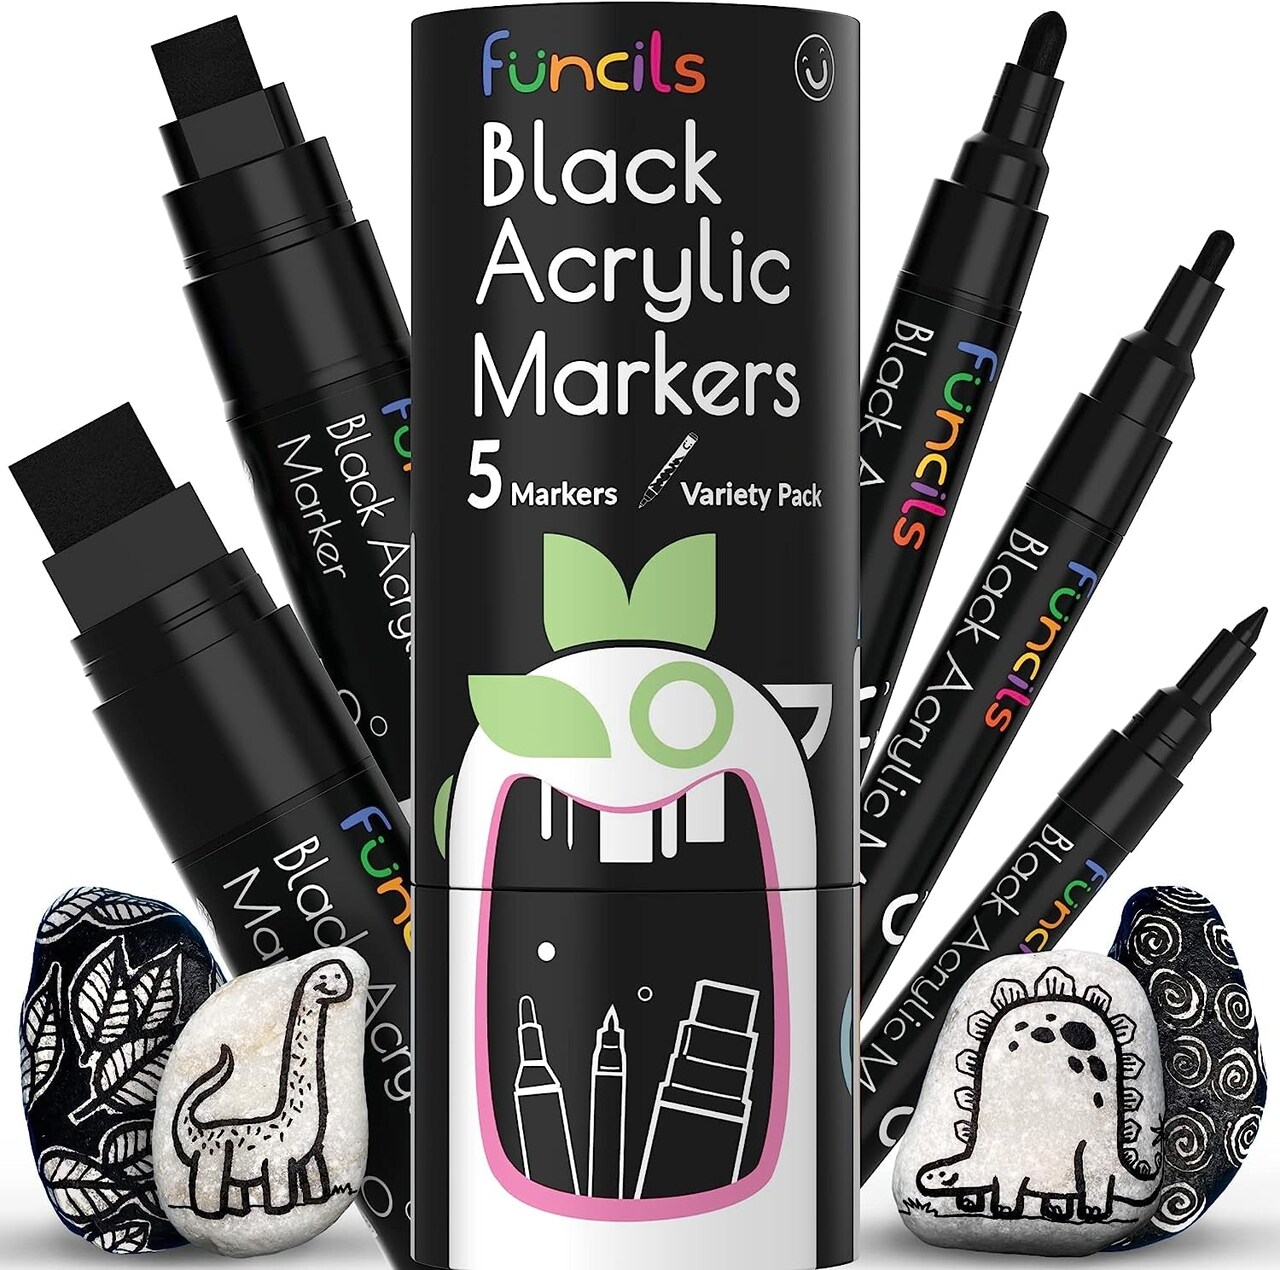 5 Acrylic Paint Pen - Fine Tip, Thin Point & Jumbo Pens (1Mm, 3Mm, 6Mm,  10Mm, 15Mm) - Paint Marker for Plastic, Canvas, Wood, Rock Painting,  Fabric, Tire, Metal, Glass